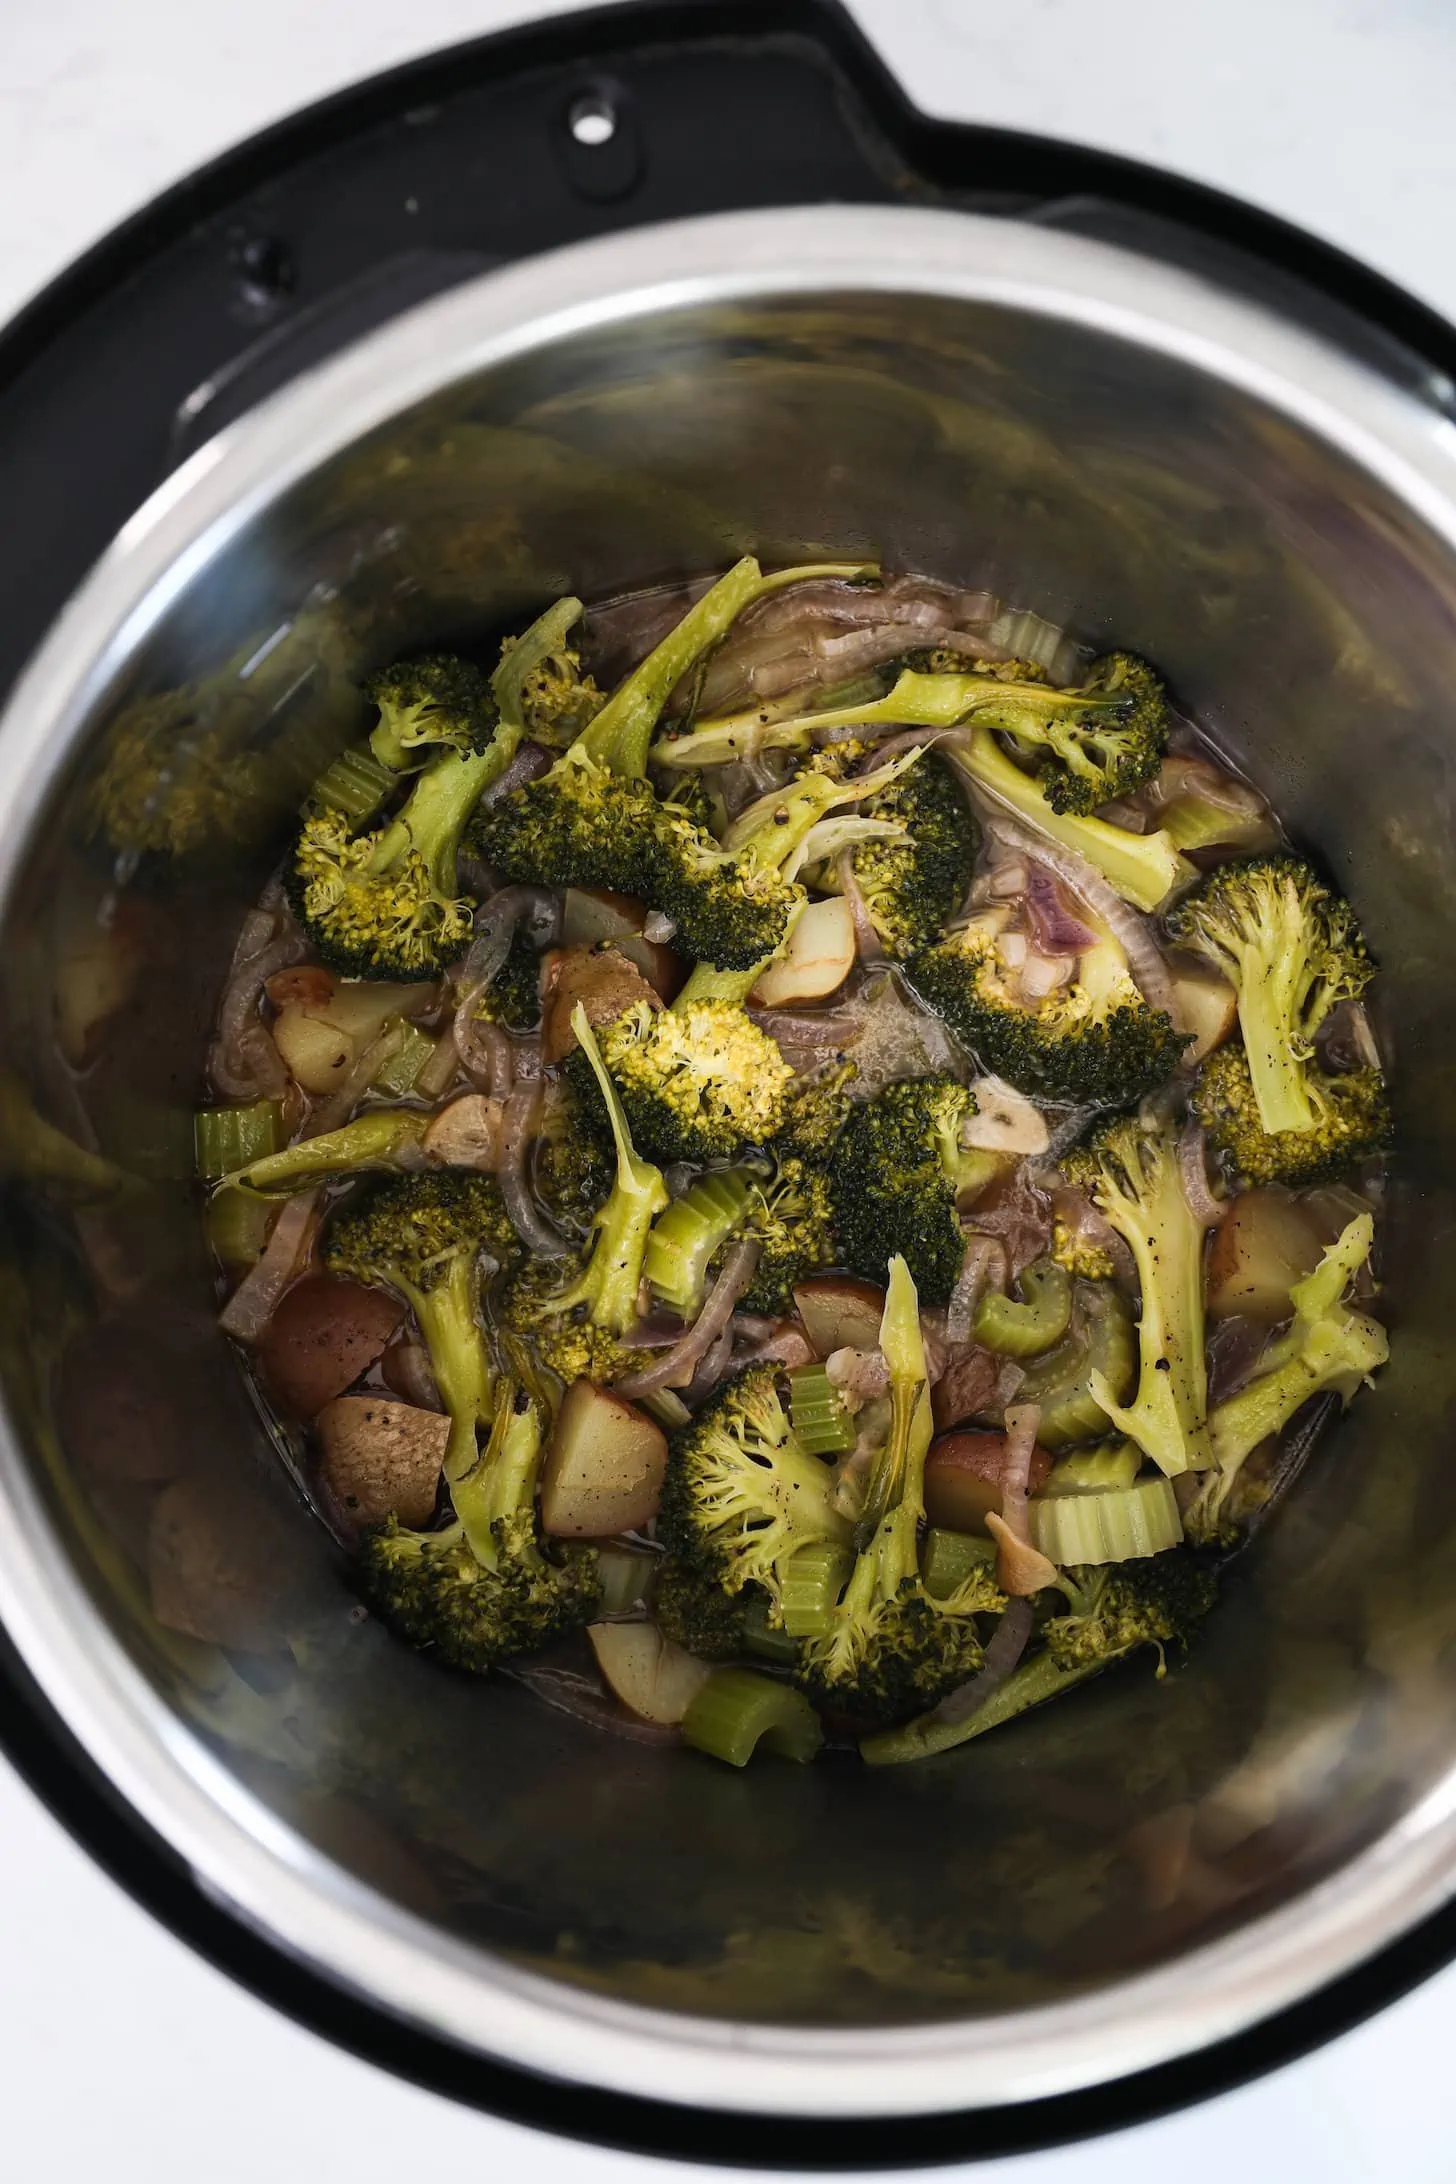 Birdseye view of Instant pot with cooked broccoli and vegetables.